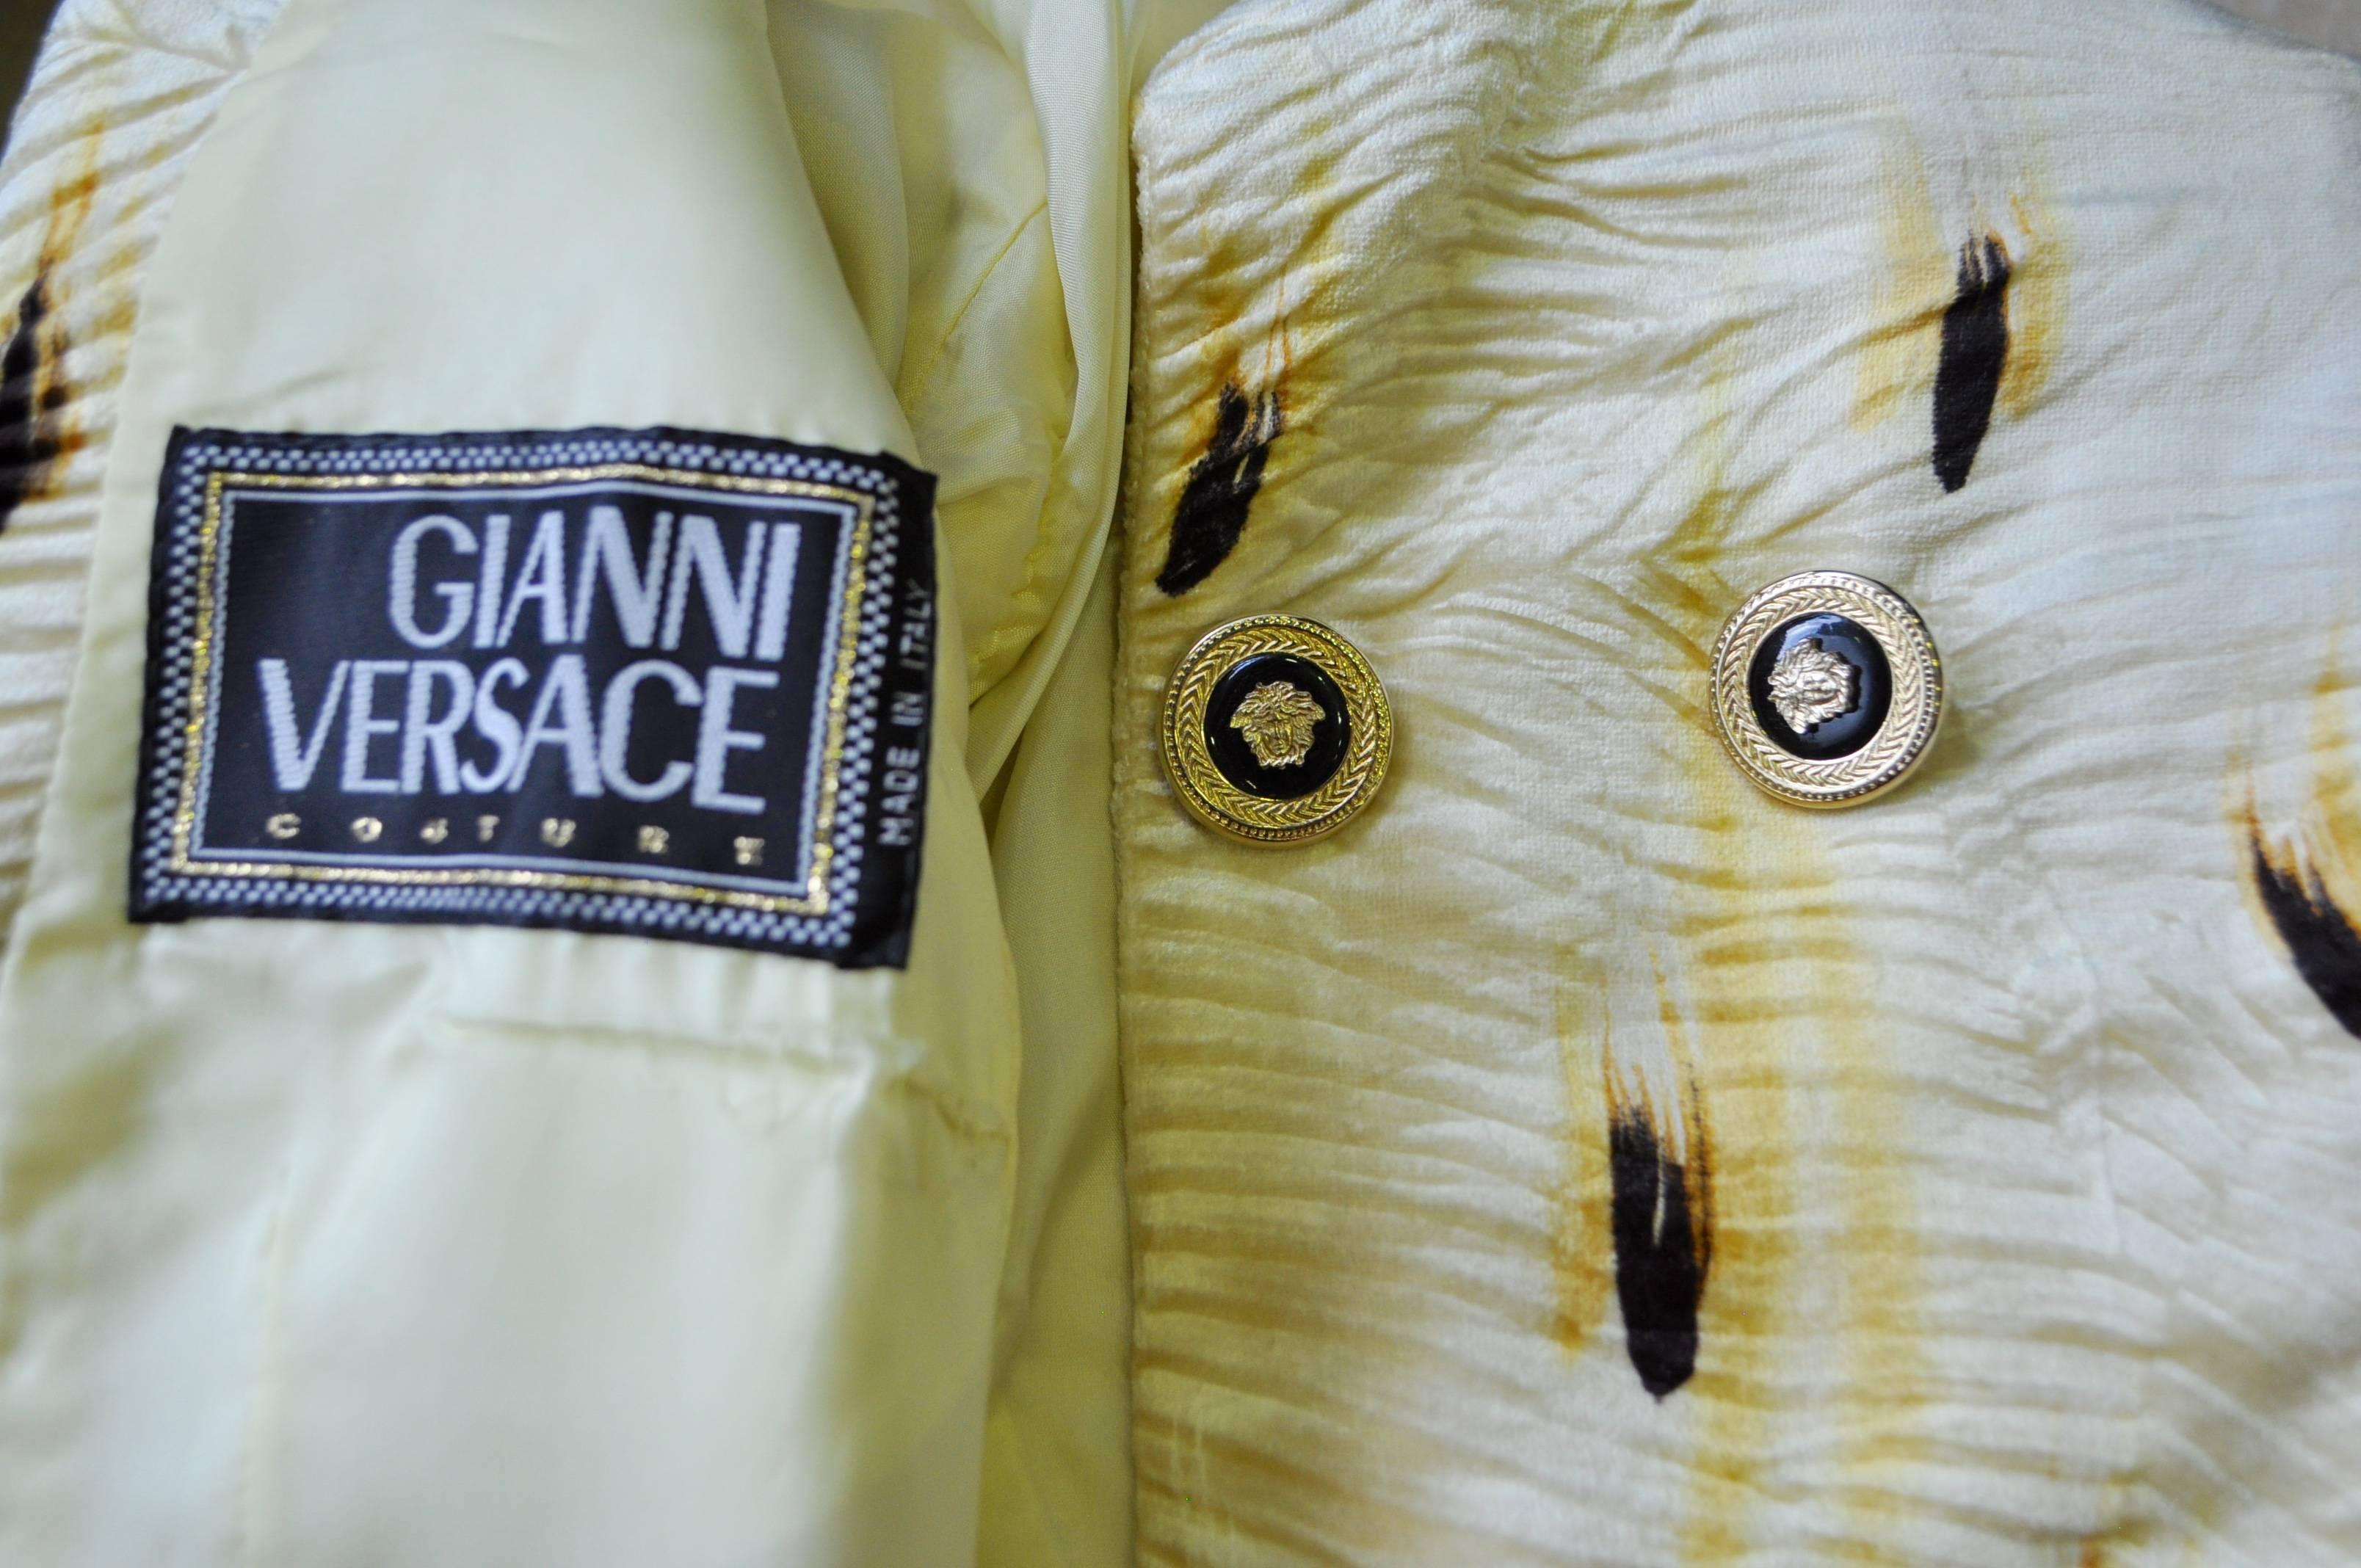 Highly Original Gianni Versace Couture Abstract Plume Print Skirt Suit For Sale 3